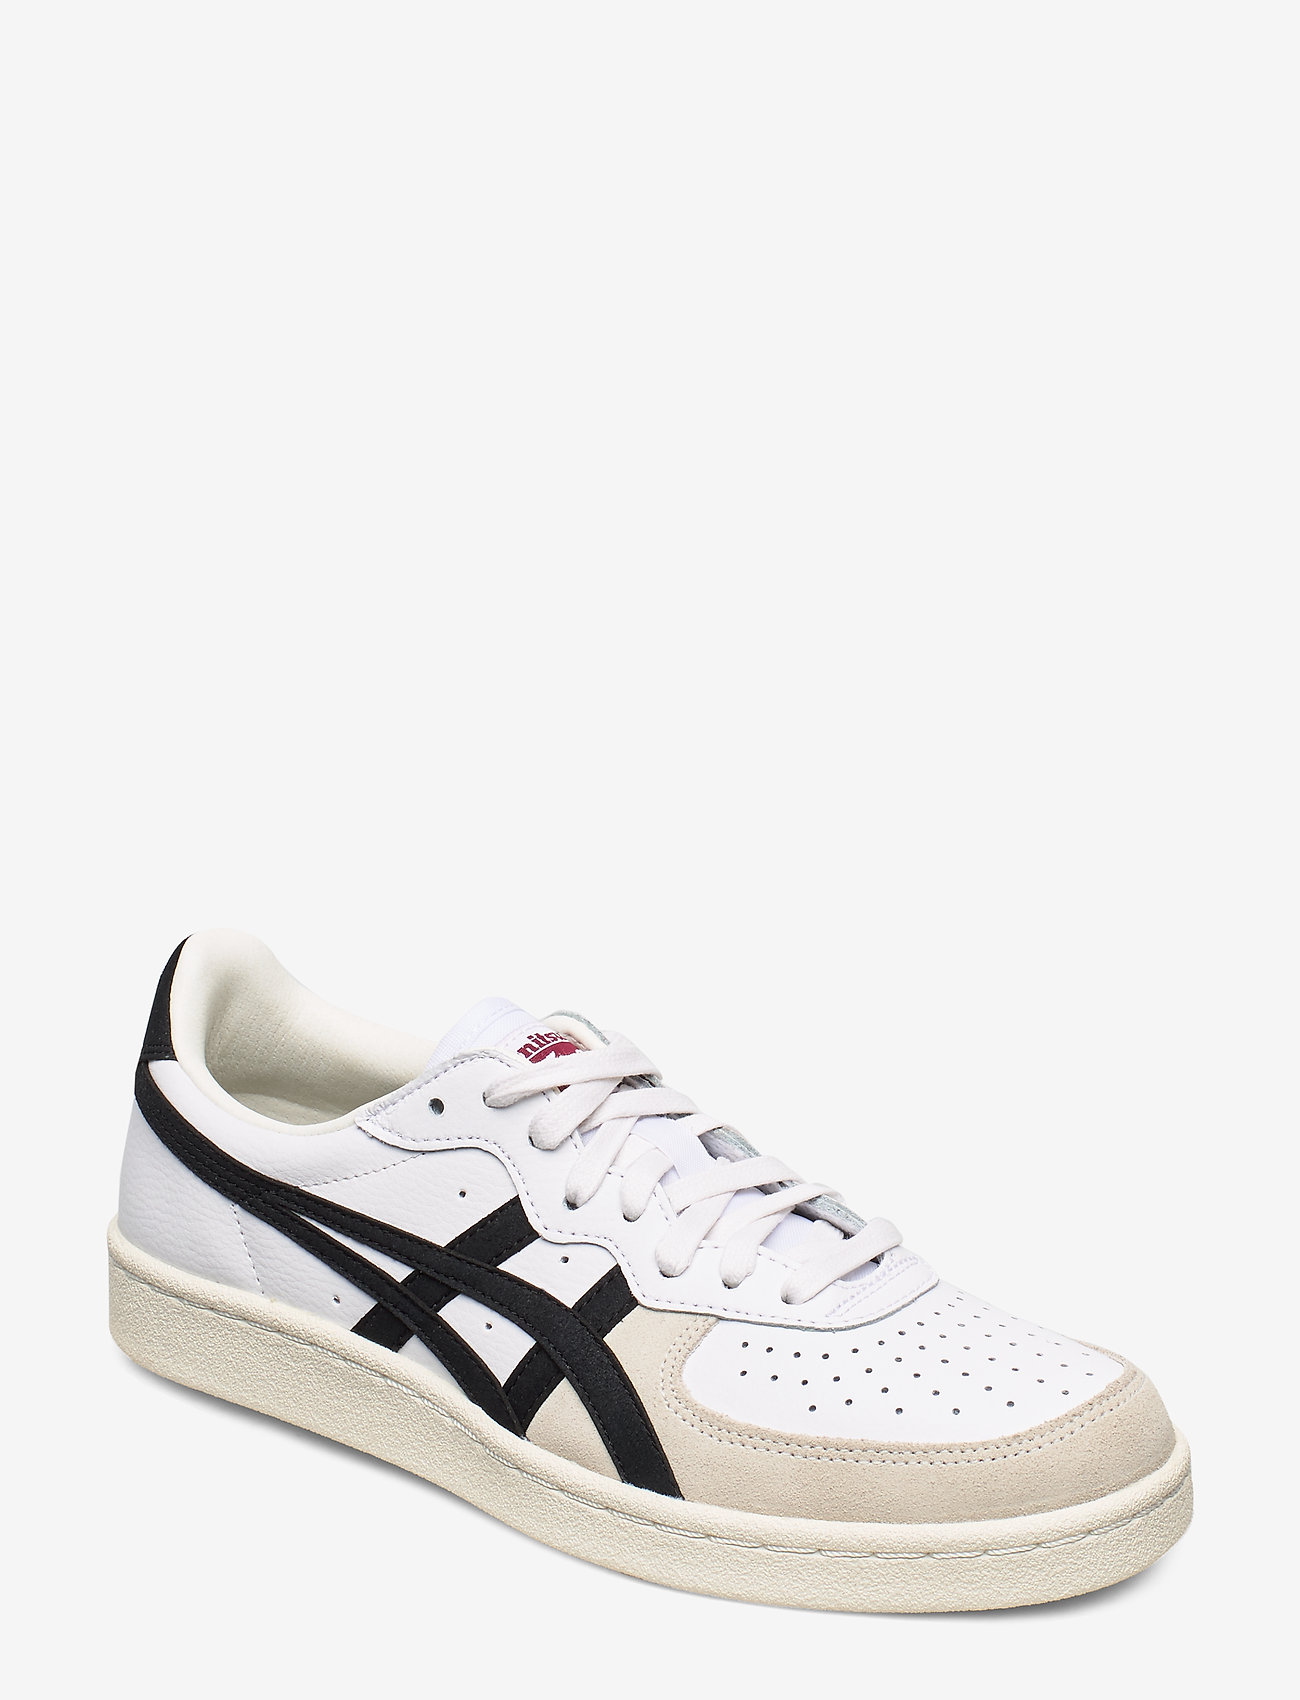 Onitsuka Tiger Gsm - Low top sneakers | Boozt.com